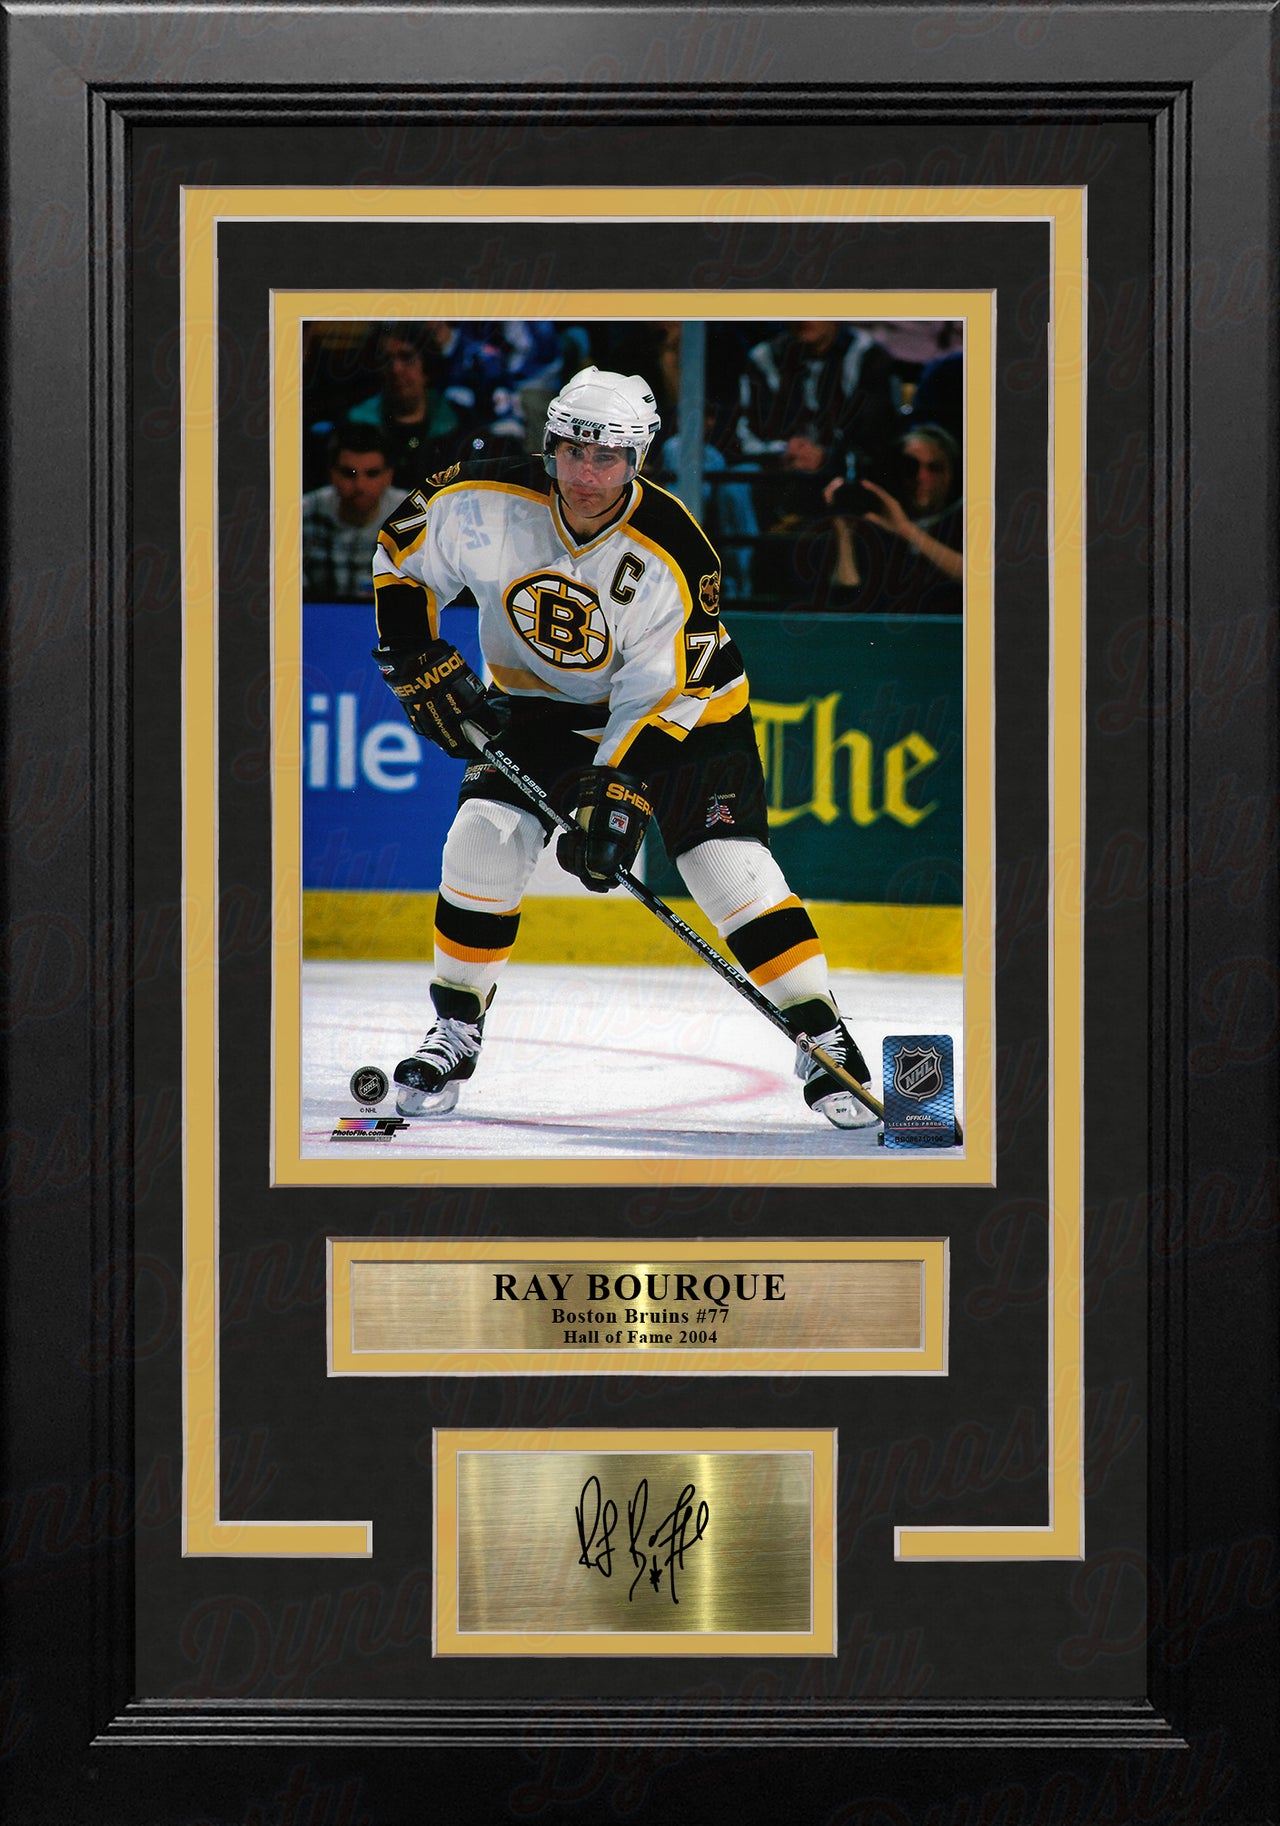 Ray Bourque in Action Boston Bruins 8" x 10" Framed Hockey Photo with Engraved Autograph